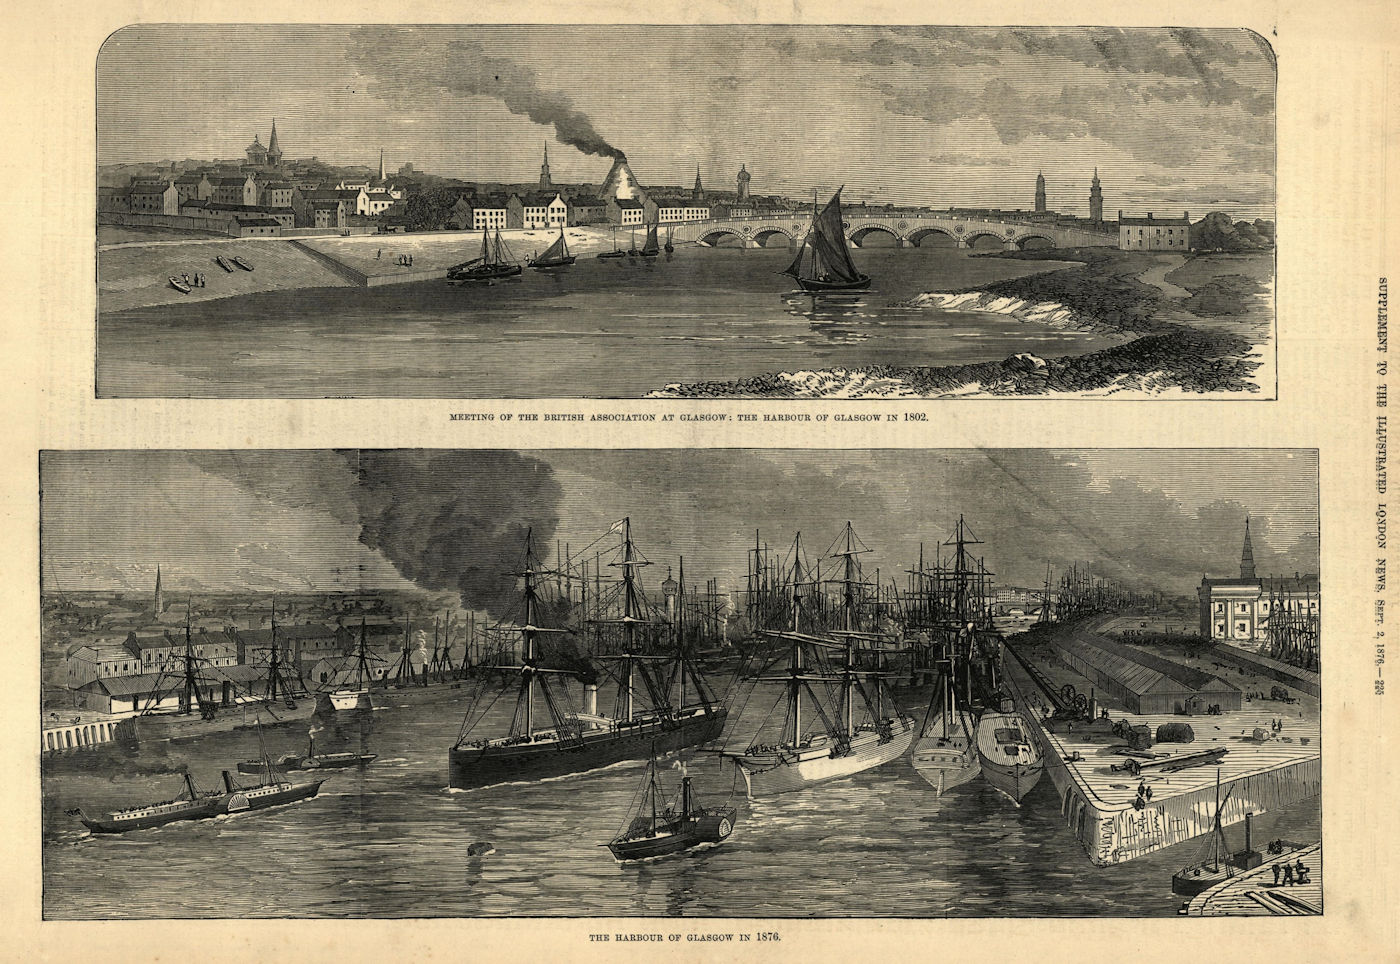 The harbour of Glasgow, in 1802 & in 1876. Scotland 1876 old antique print